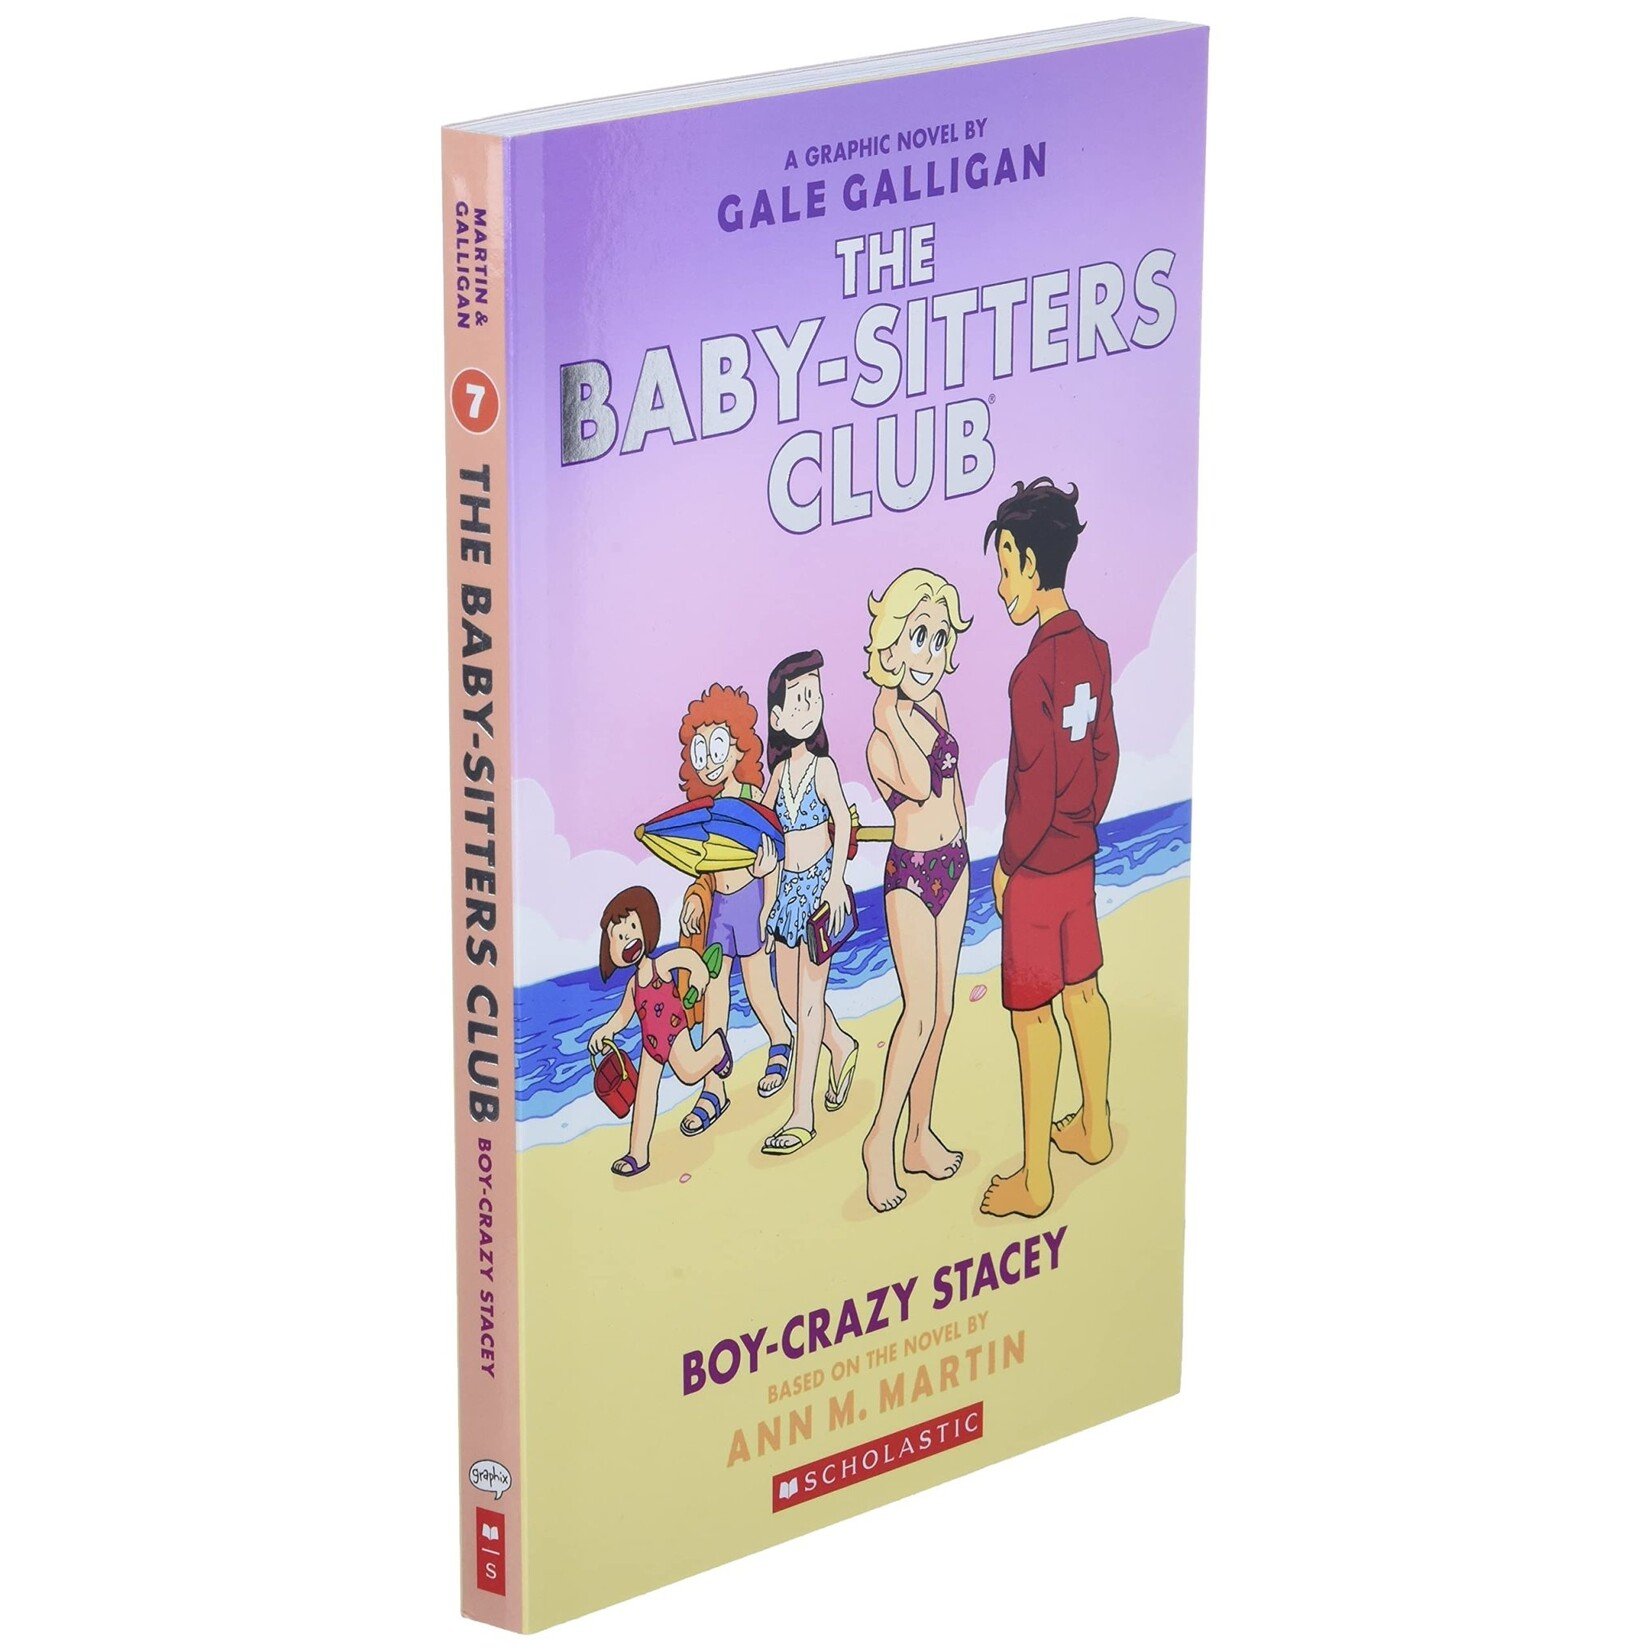 Boy-Crazy Stacey: A Graphic Novel (The Baby-Sitters Club #7)